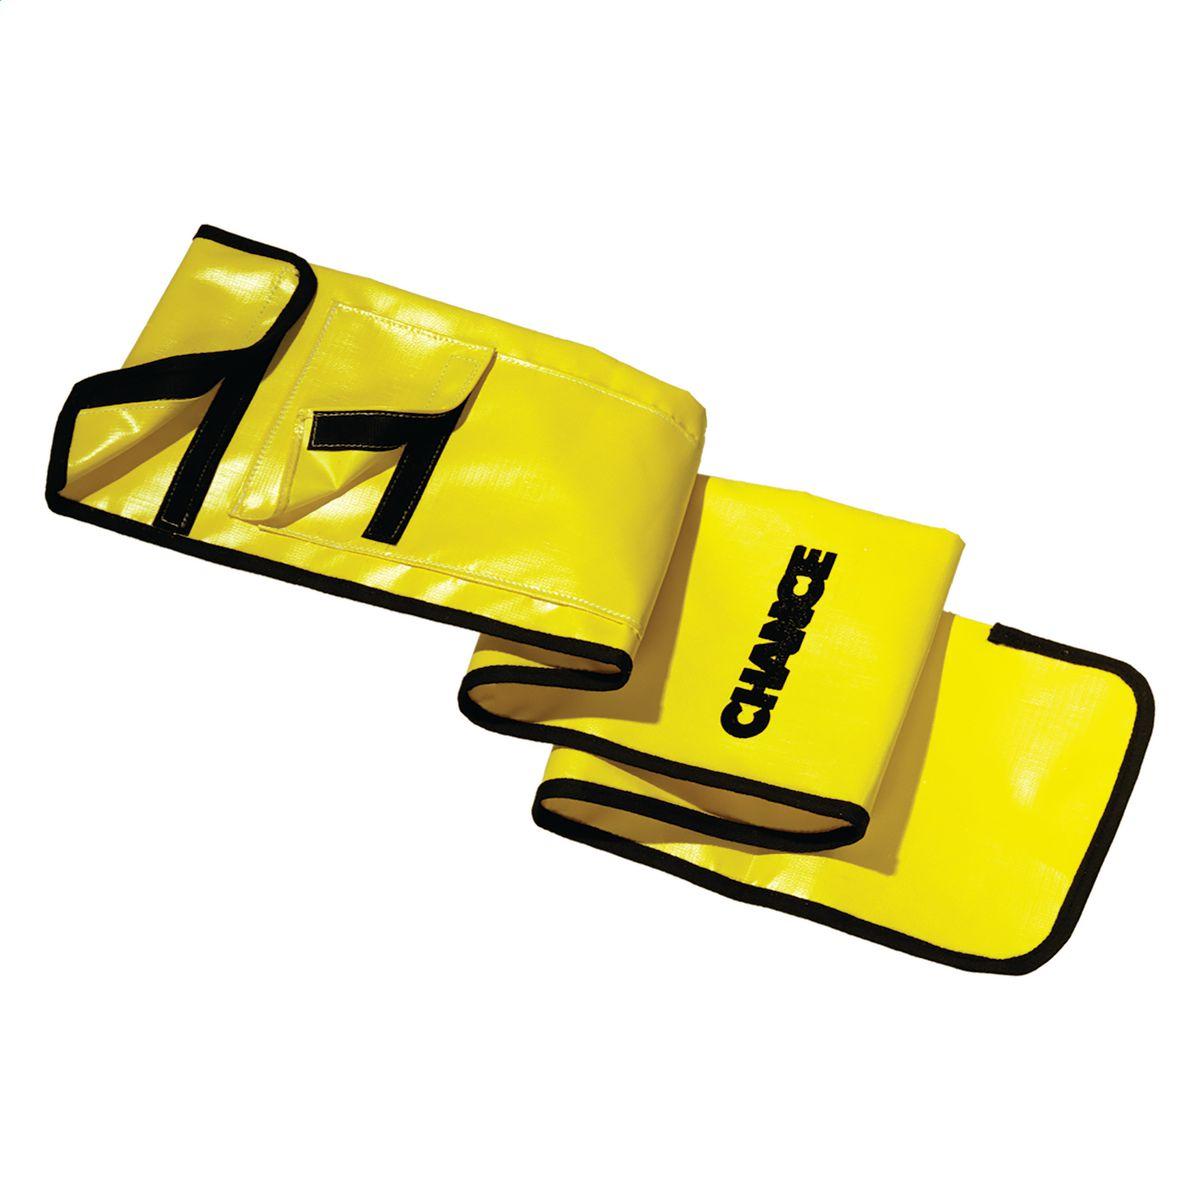 Hubbell P6406 TOOL BAG, 6' 11" L X 11" W, Chance waterproof storage bags help guard against contaminants and abrasion to help maintain the insulating properties of hotline tools. Yellow heavy-duty vinyl-impregnated fabric lasts for years of rugged service. Snaps, Velcr